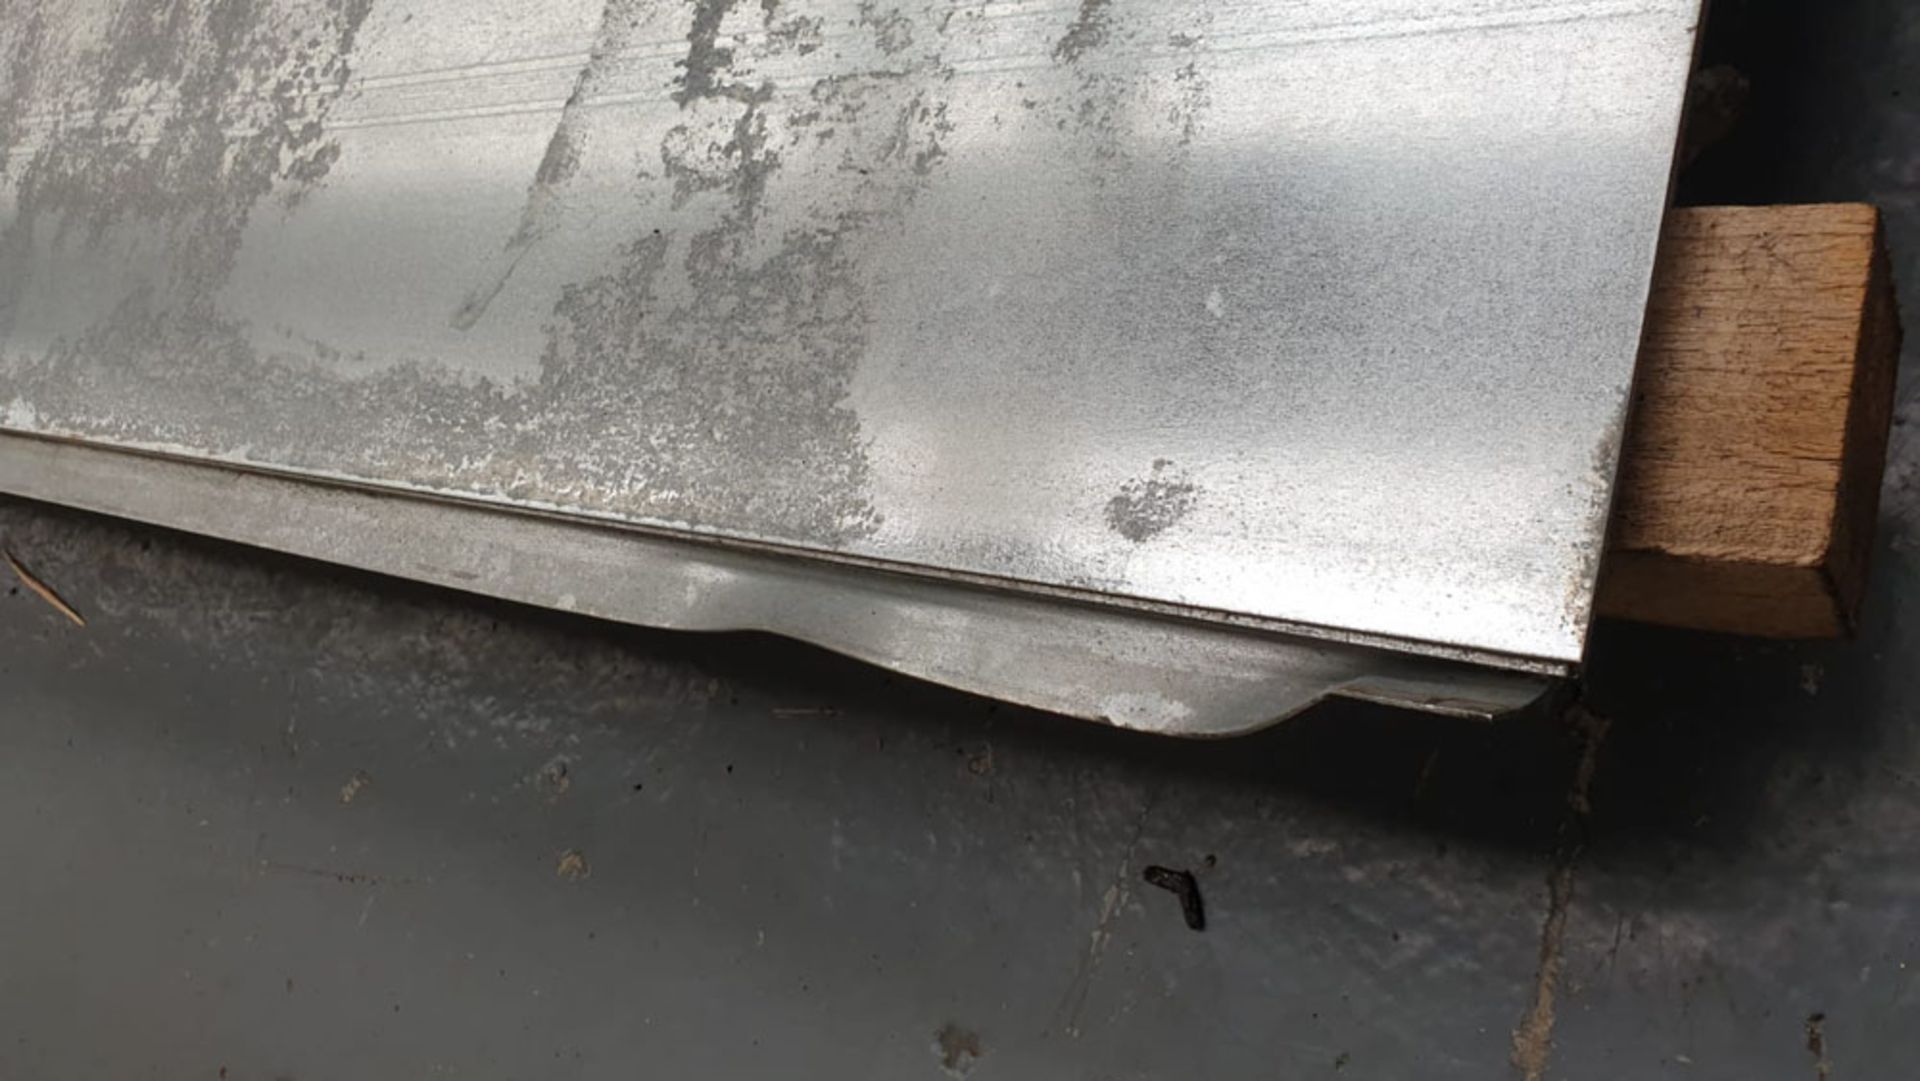 8 x Galvanised Steel Sheets. Approx 3000mm x 1500mm x 1.5mm Thickness. 1 x Damaged Sheet. - Image 3 of 3